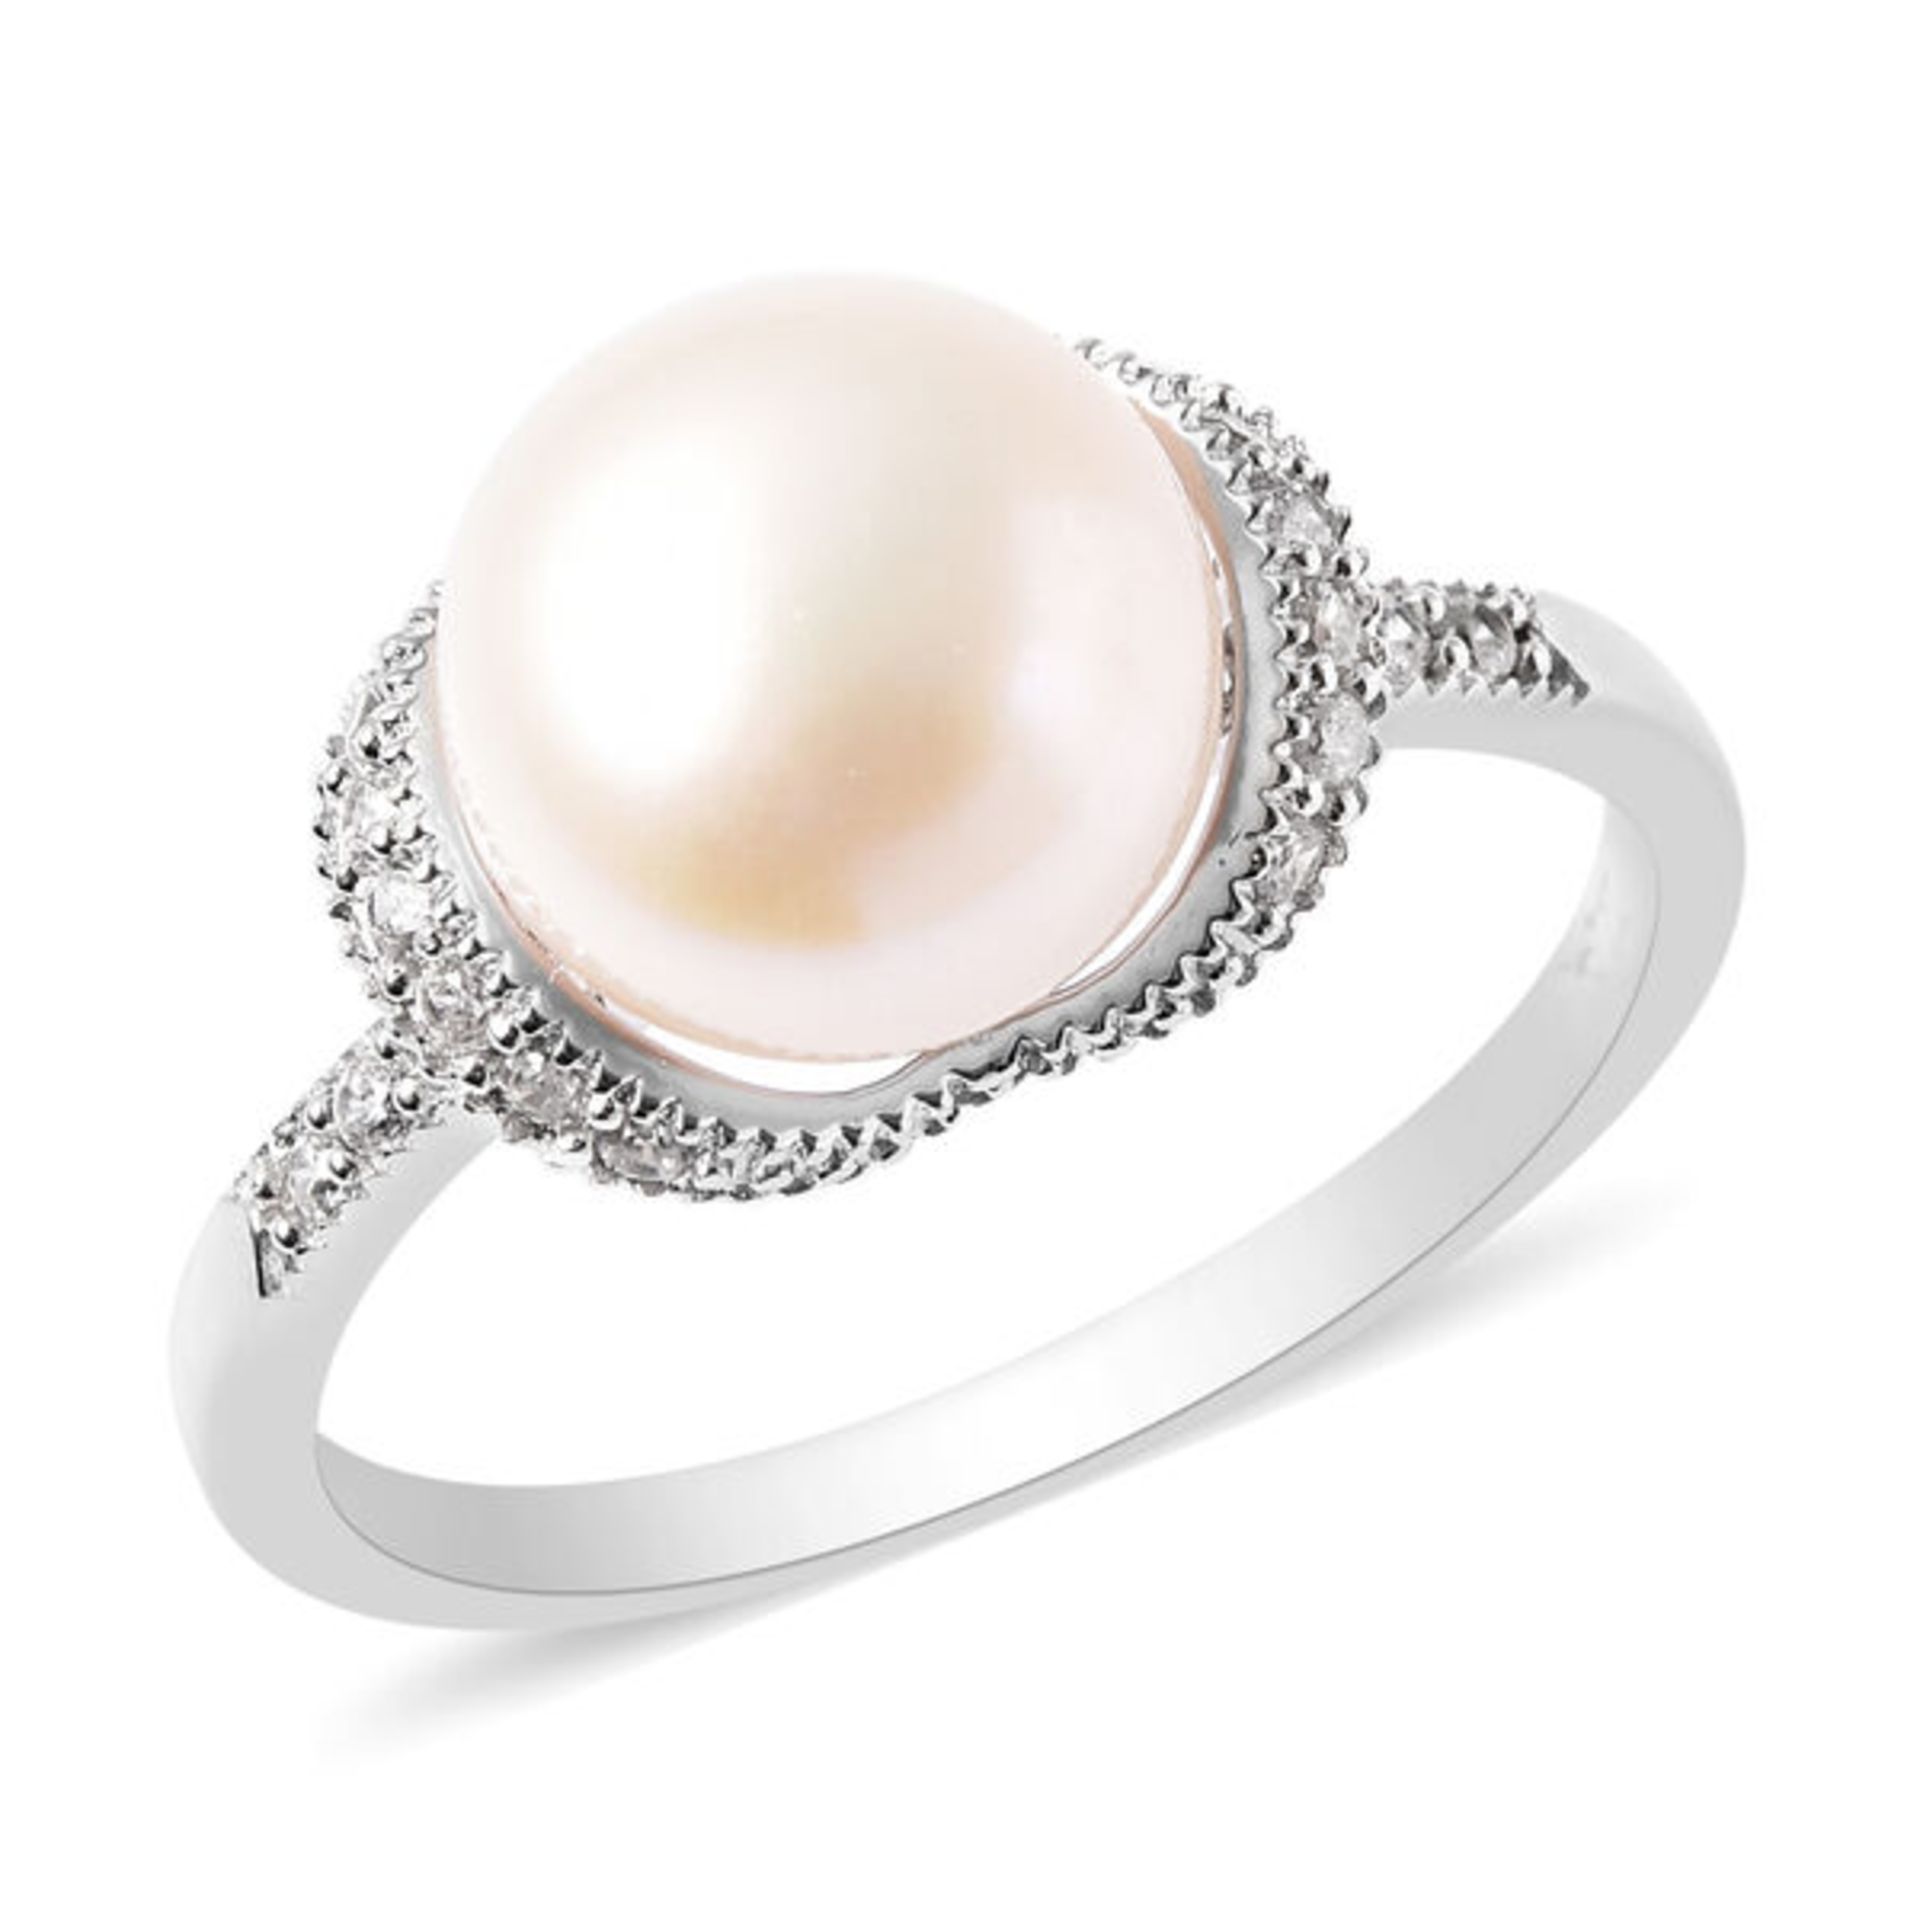 New! Freshwater White Pearl and Simulated Diamond Ring In Rhodium Overlay